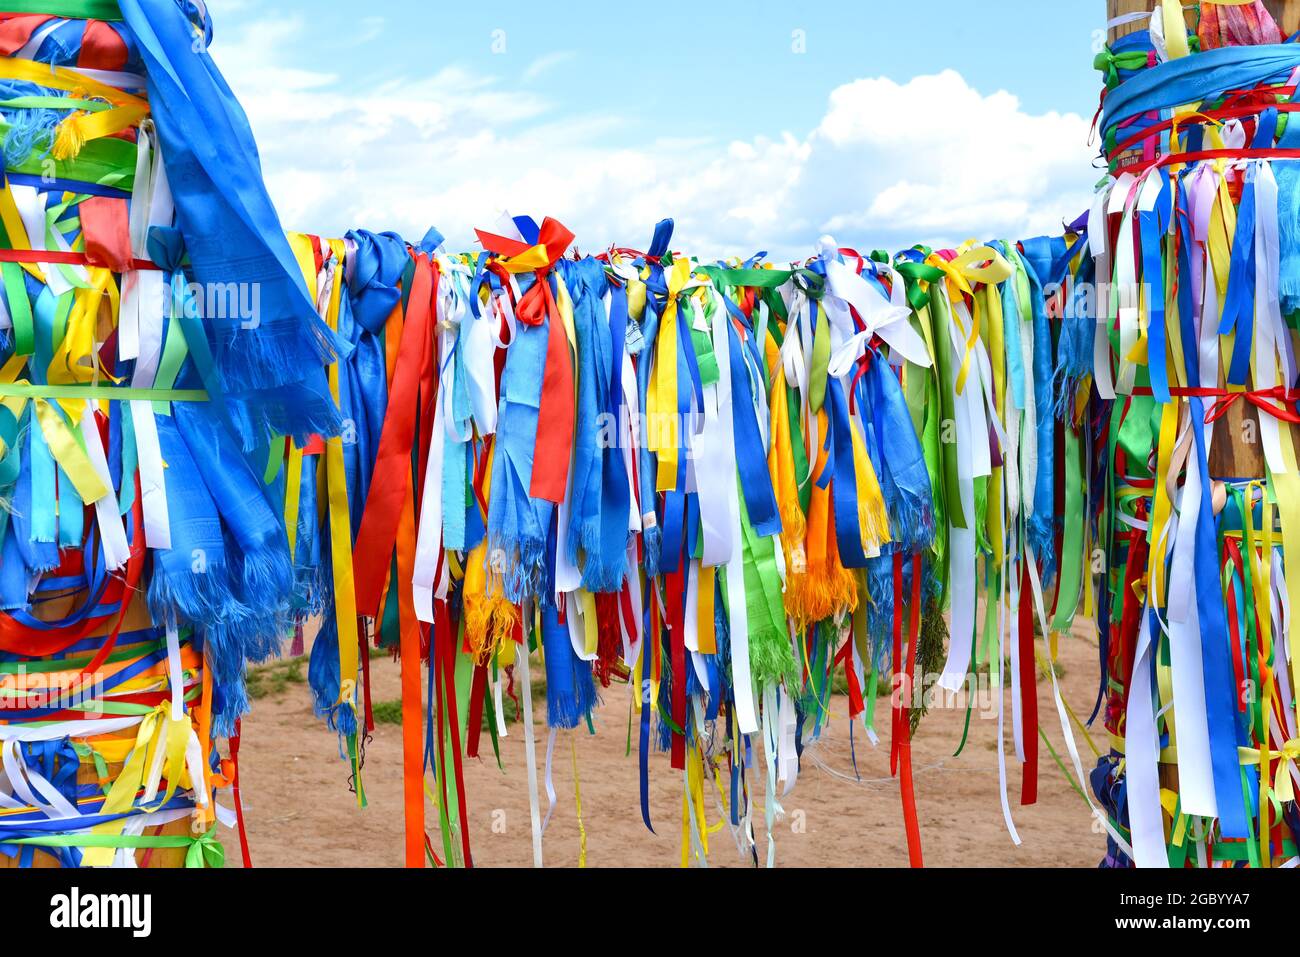 Colorful ribbons on hitching posts of shamanism religion in Khuzhir, island Olkhon. Stock Photo